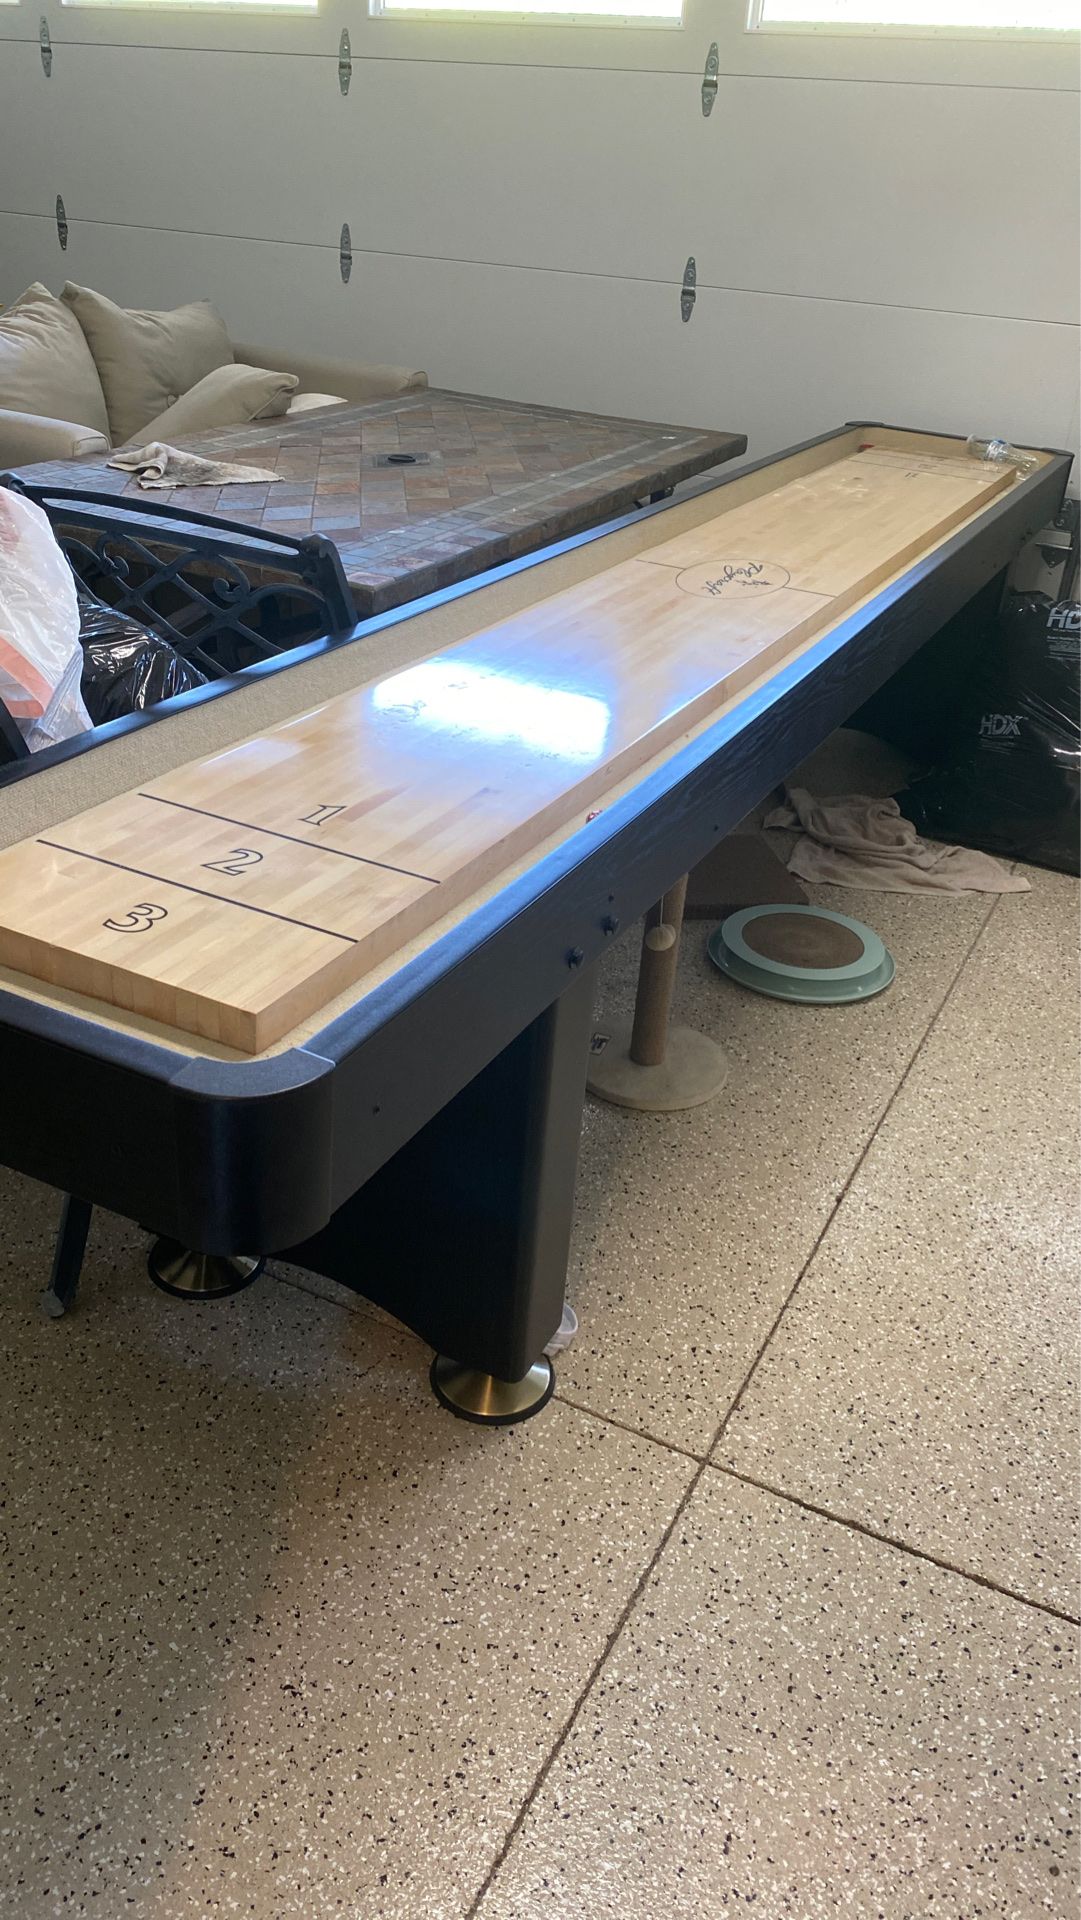 Shuffleboard table. Like brand new. Hardly used. Downsizing in house size and have no space